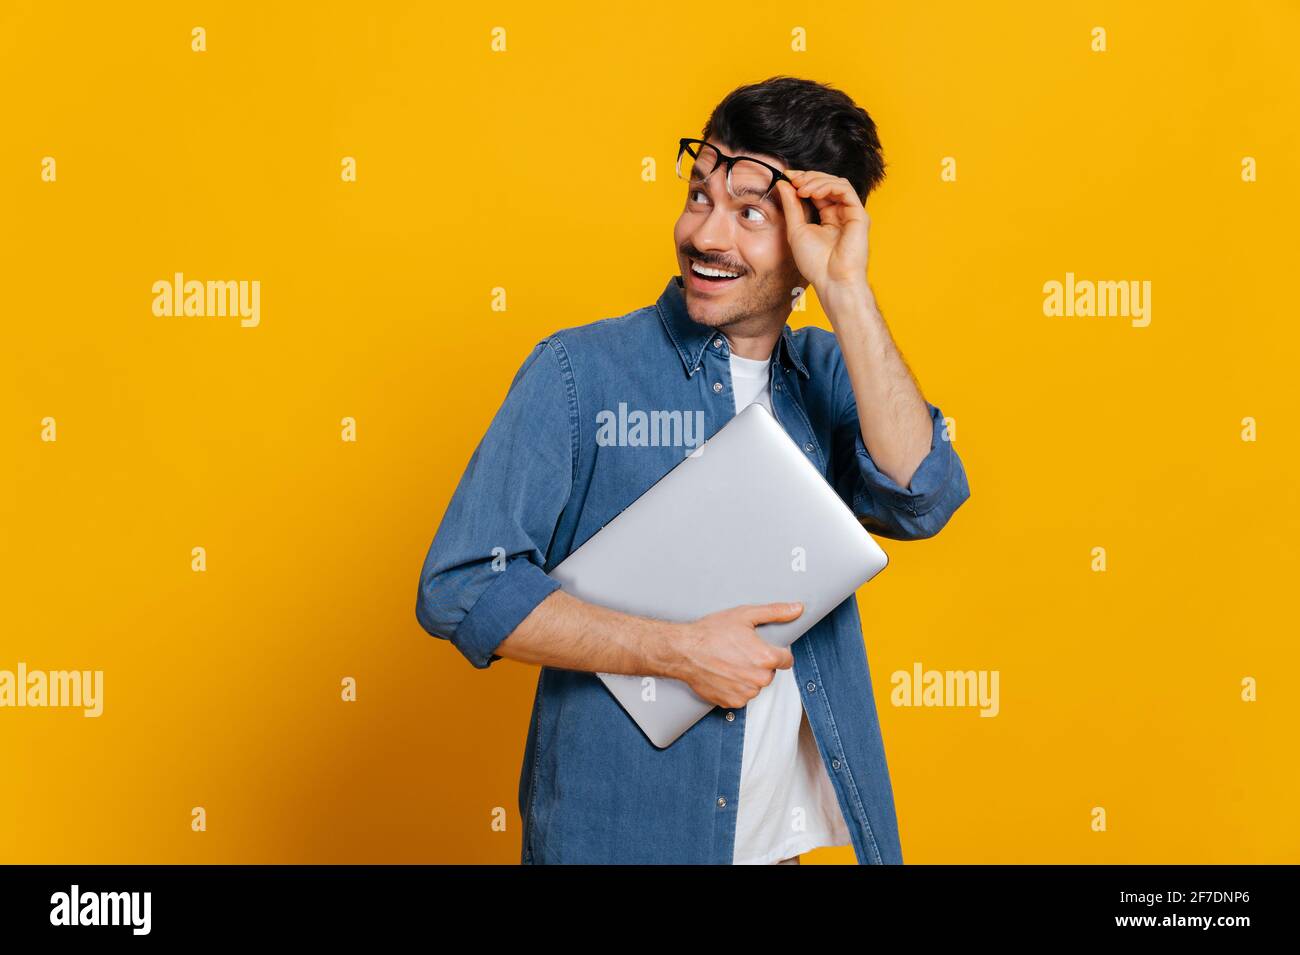 Amazed excited charismatic guy with glasses and stylishly dressed, holds a laptop at hand, looks surprised towards empty space taking off glasses, smiling, isolated orange background, copy space Stock Photo